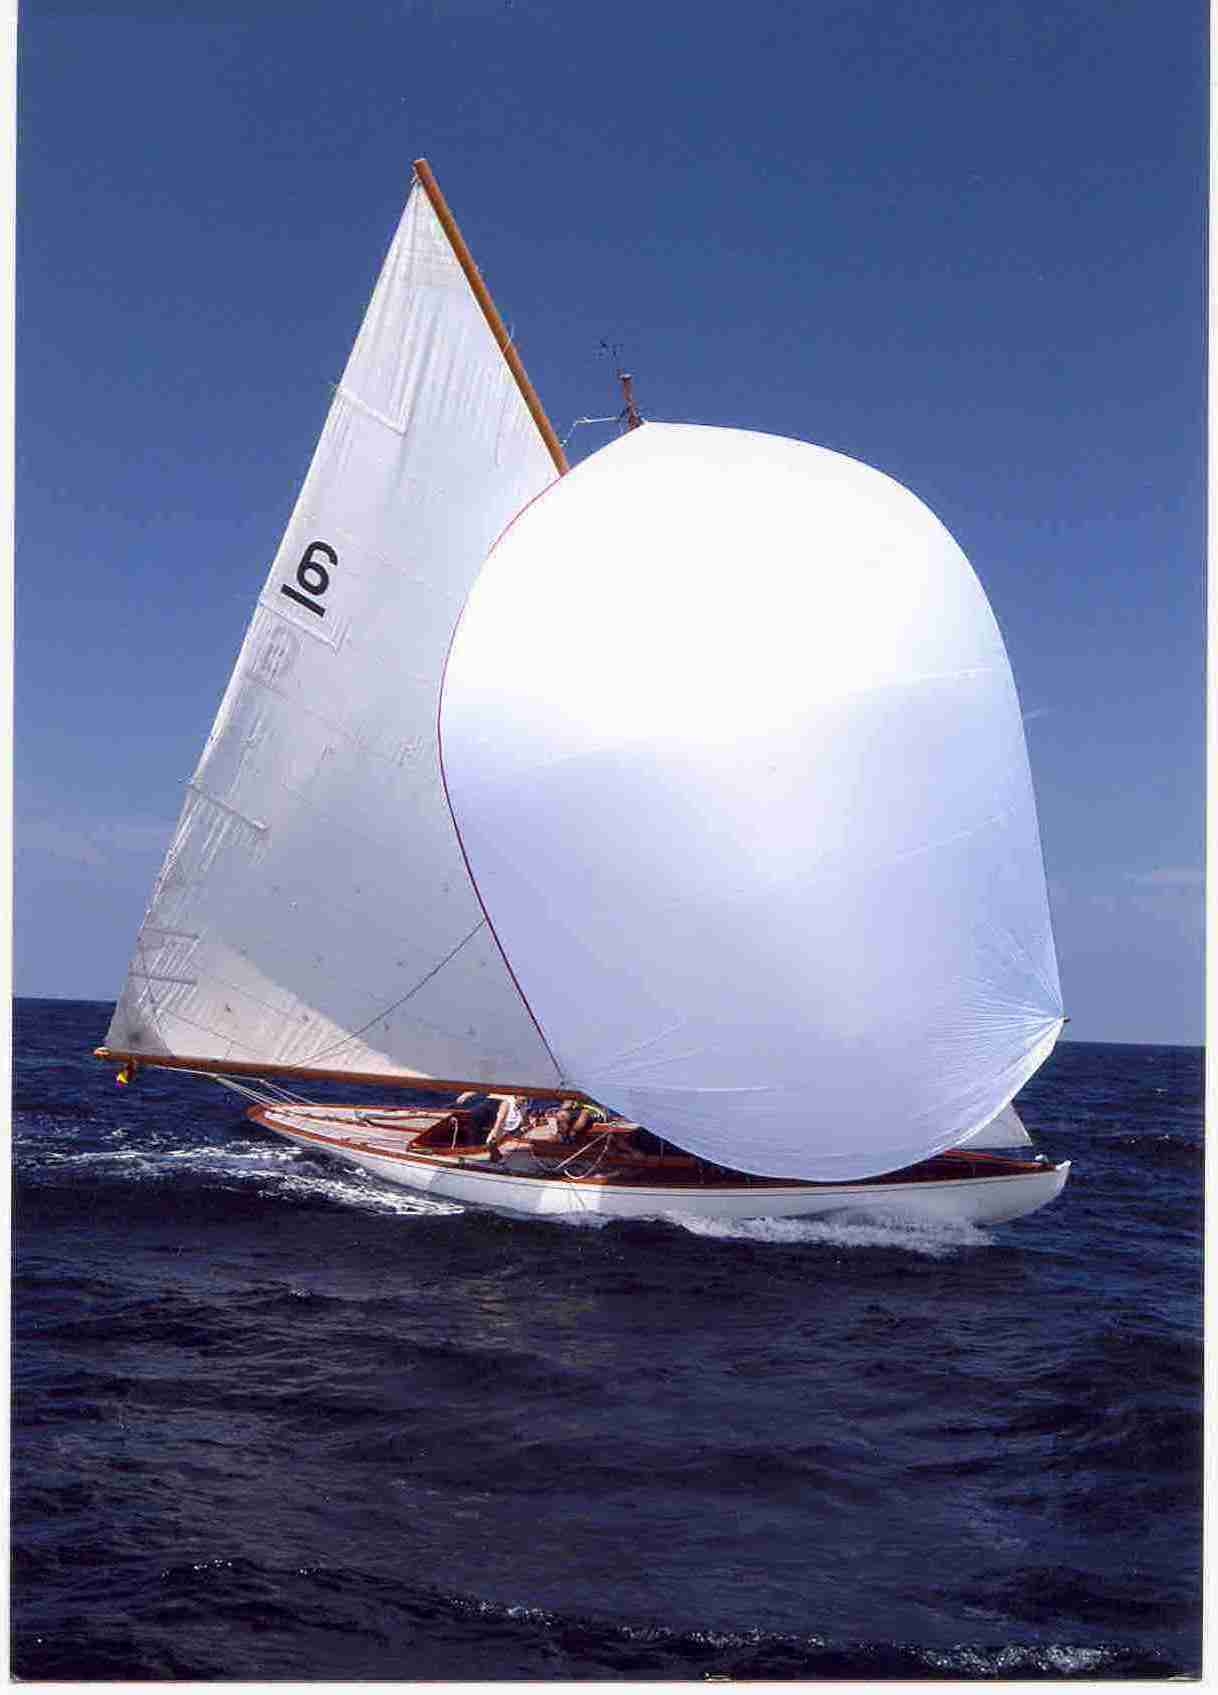 White yacht with a white sail and spinnaker. The sky and water is blue.